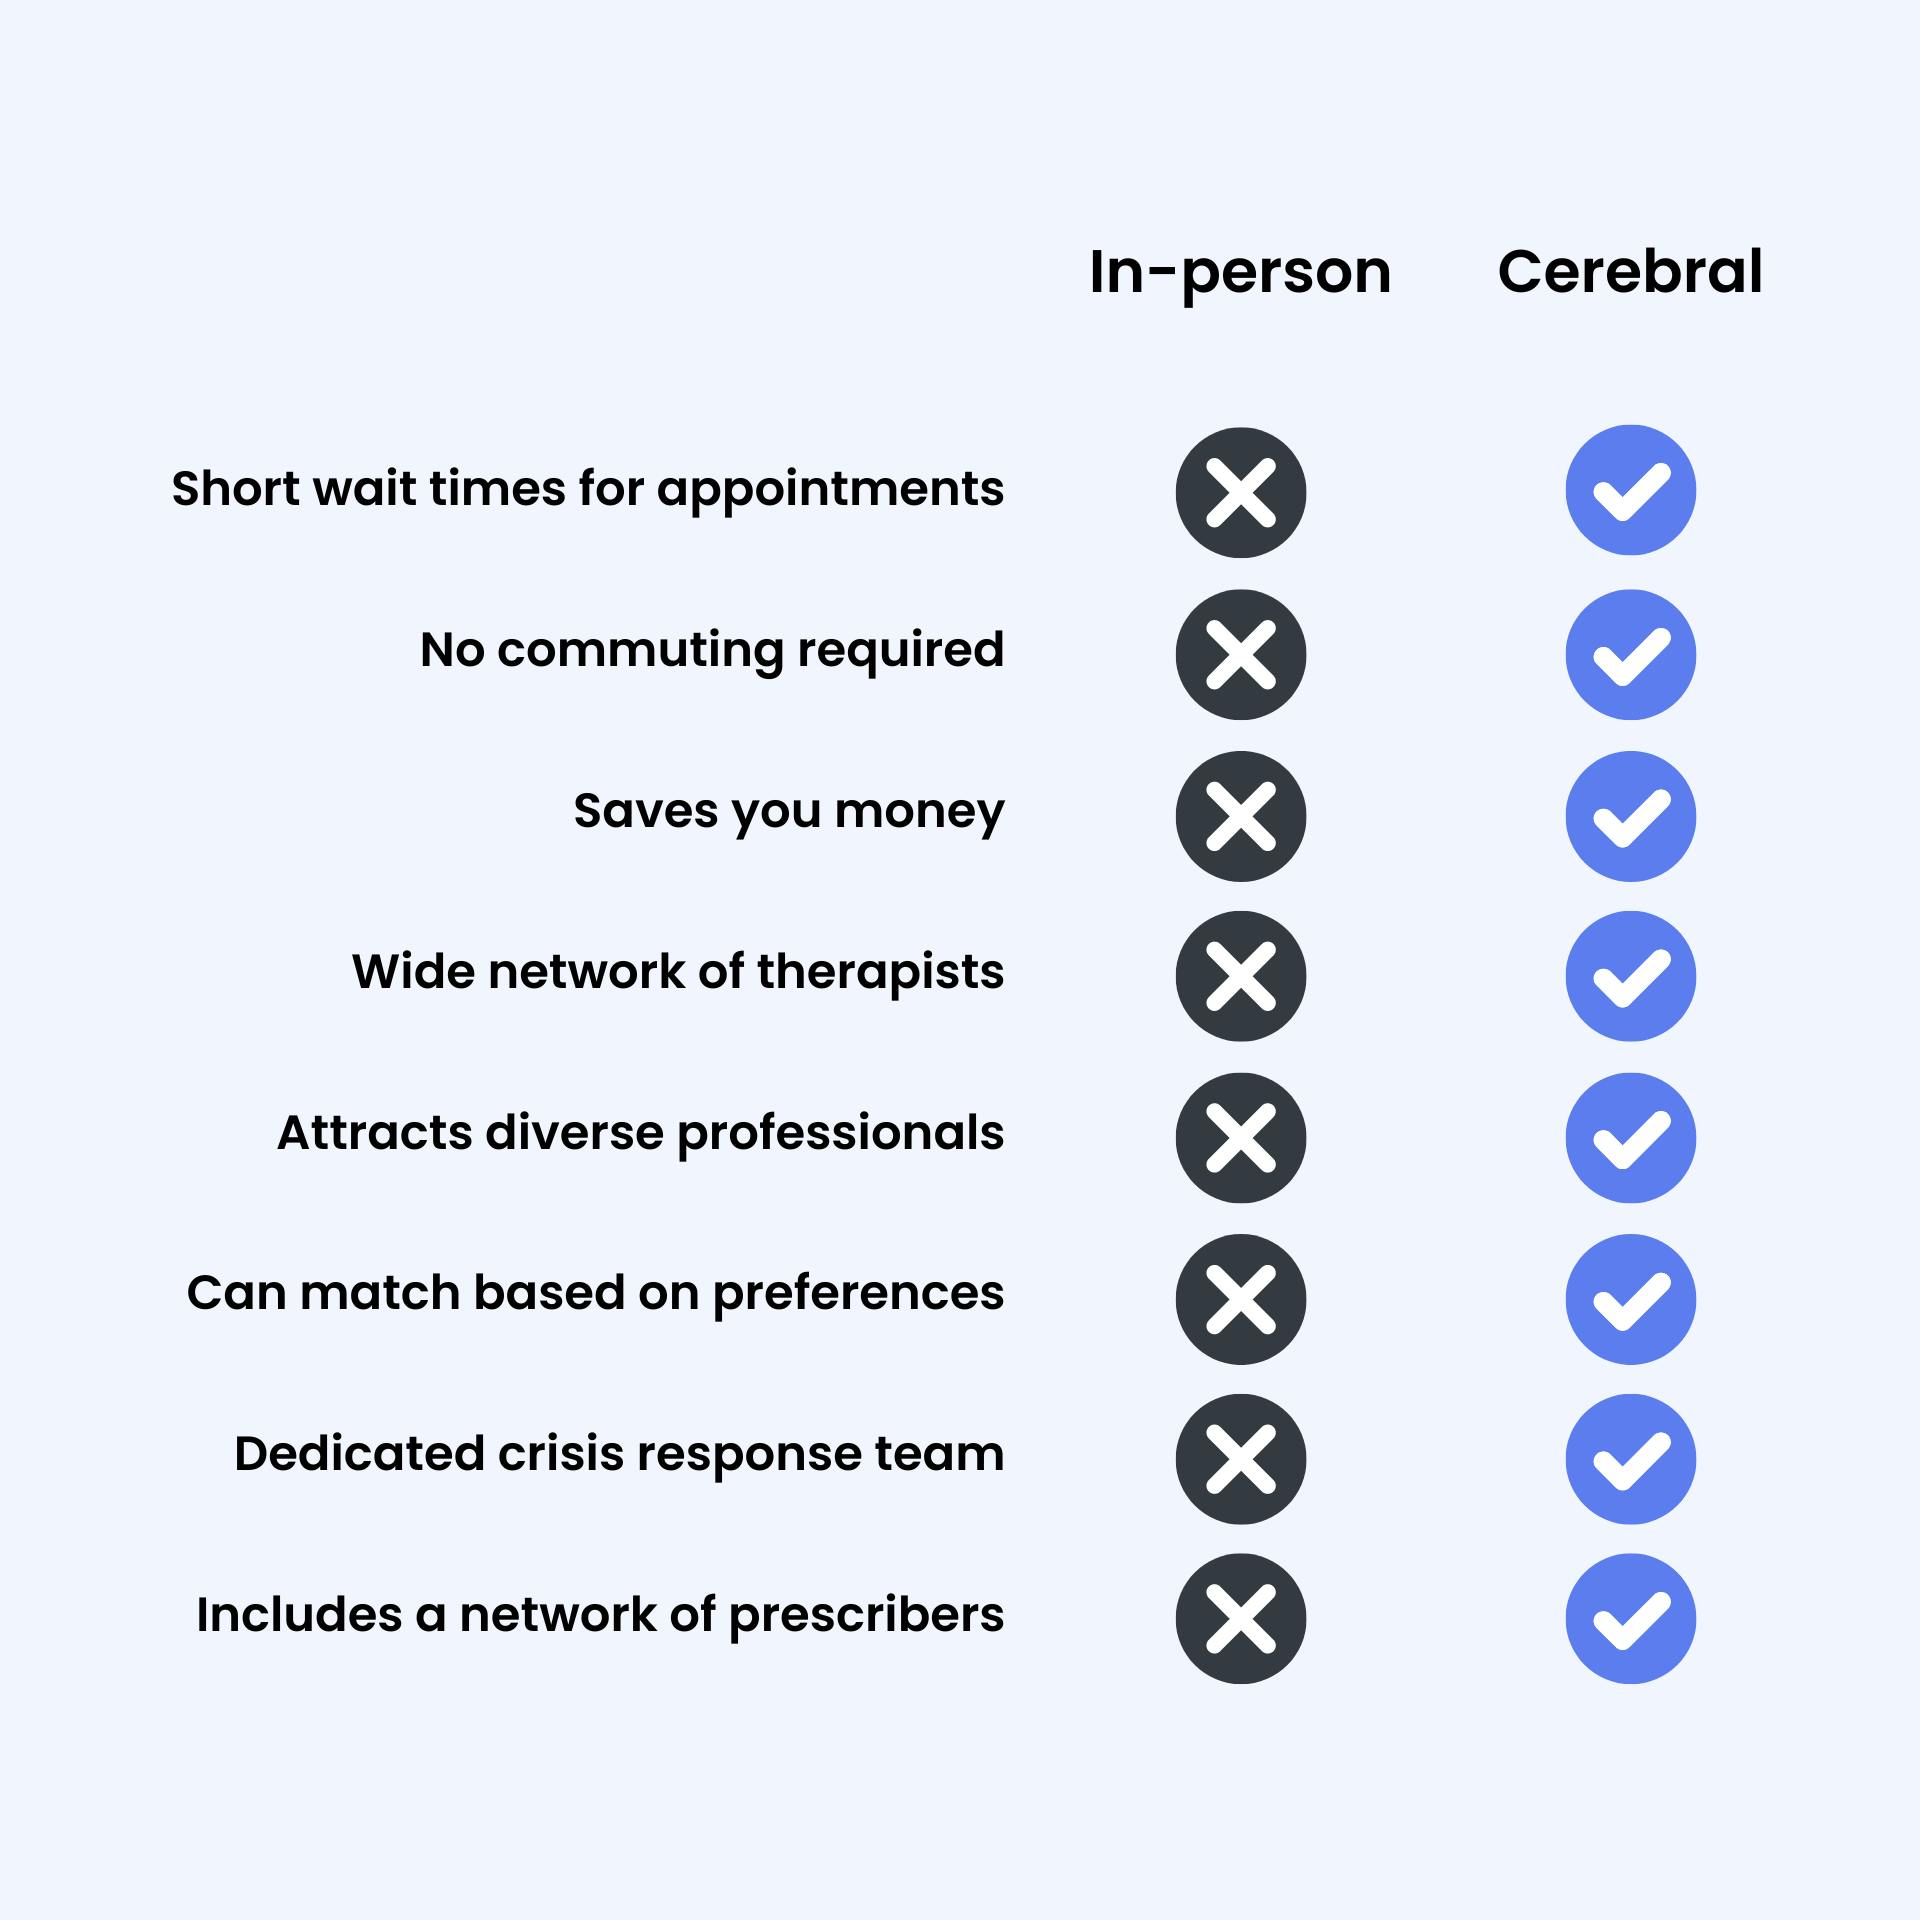 Chart compares in-person therapy vs. Cerebral’s online therapists, highlighting that online therapy doesn’t require commuting, saves money, offers short waits for appointments, provides access to a wide network of diverse therapists that can be matched by preferences, offers a dedicated crisis response team, and includes a network of prescribers